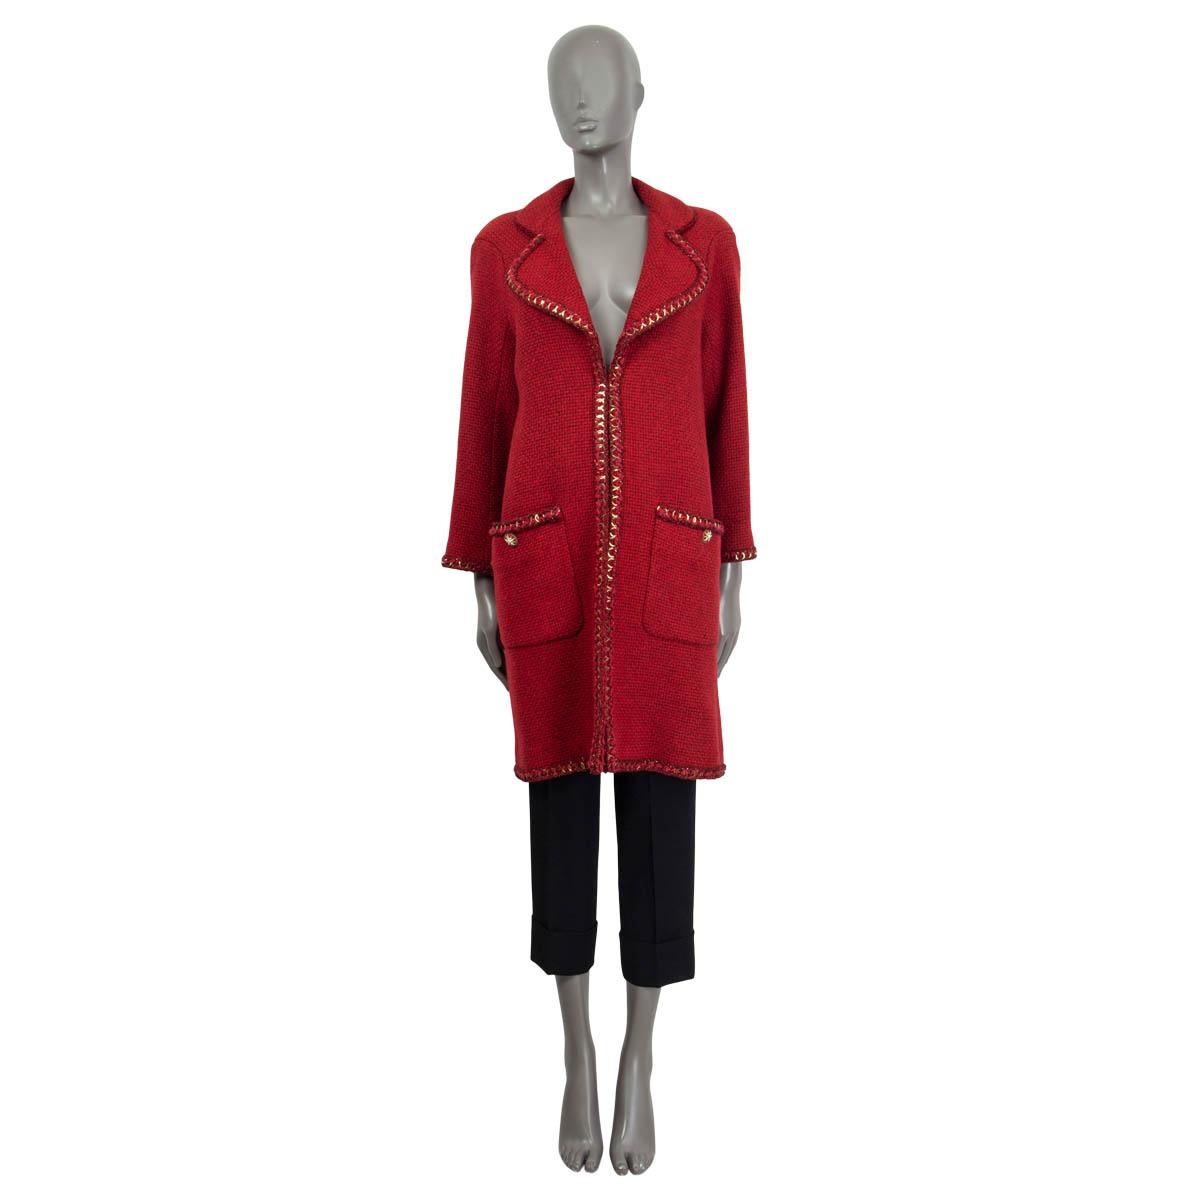 100% authentic Chanel tweed coat in red alpaca (76%), wool (19%) and nylon (5%). Features a chain trim, buttoned sleeves and two buttoned patch pockets on the front. Opens with one hook on the front. Lined in red silk (100%). Has been worn and is in